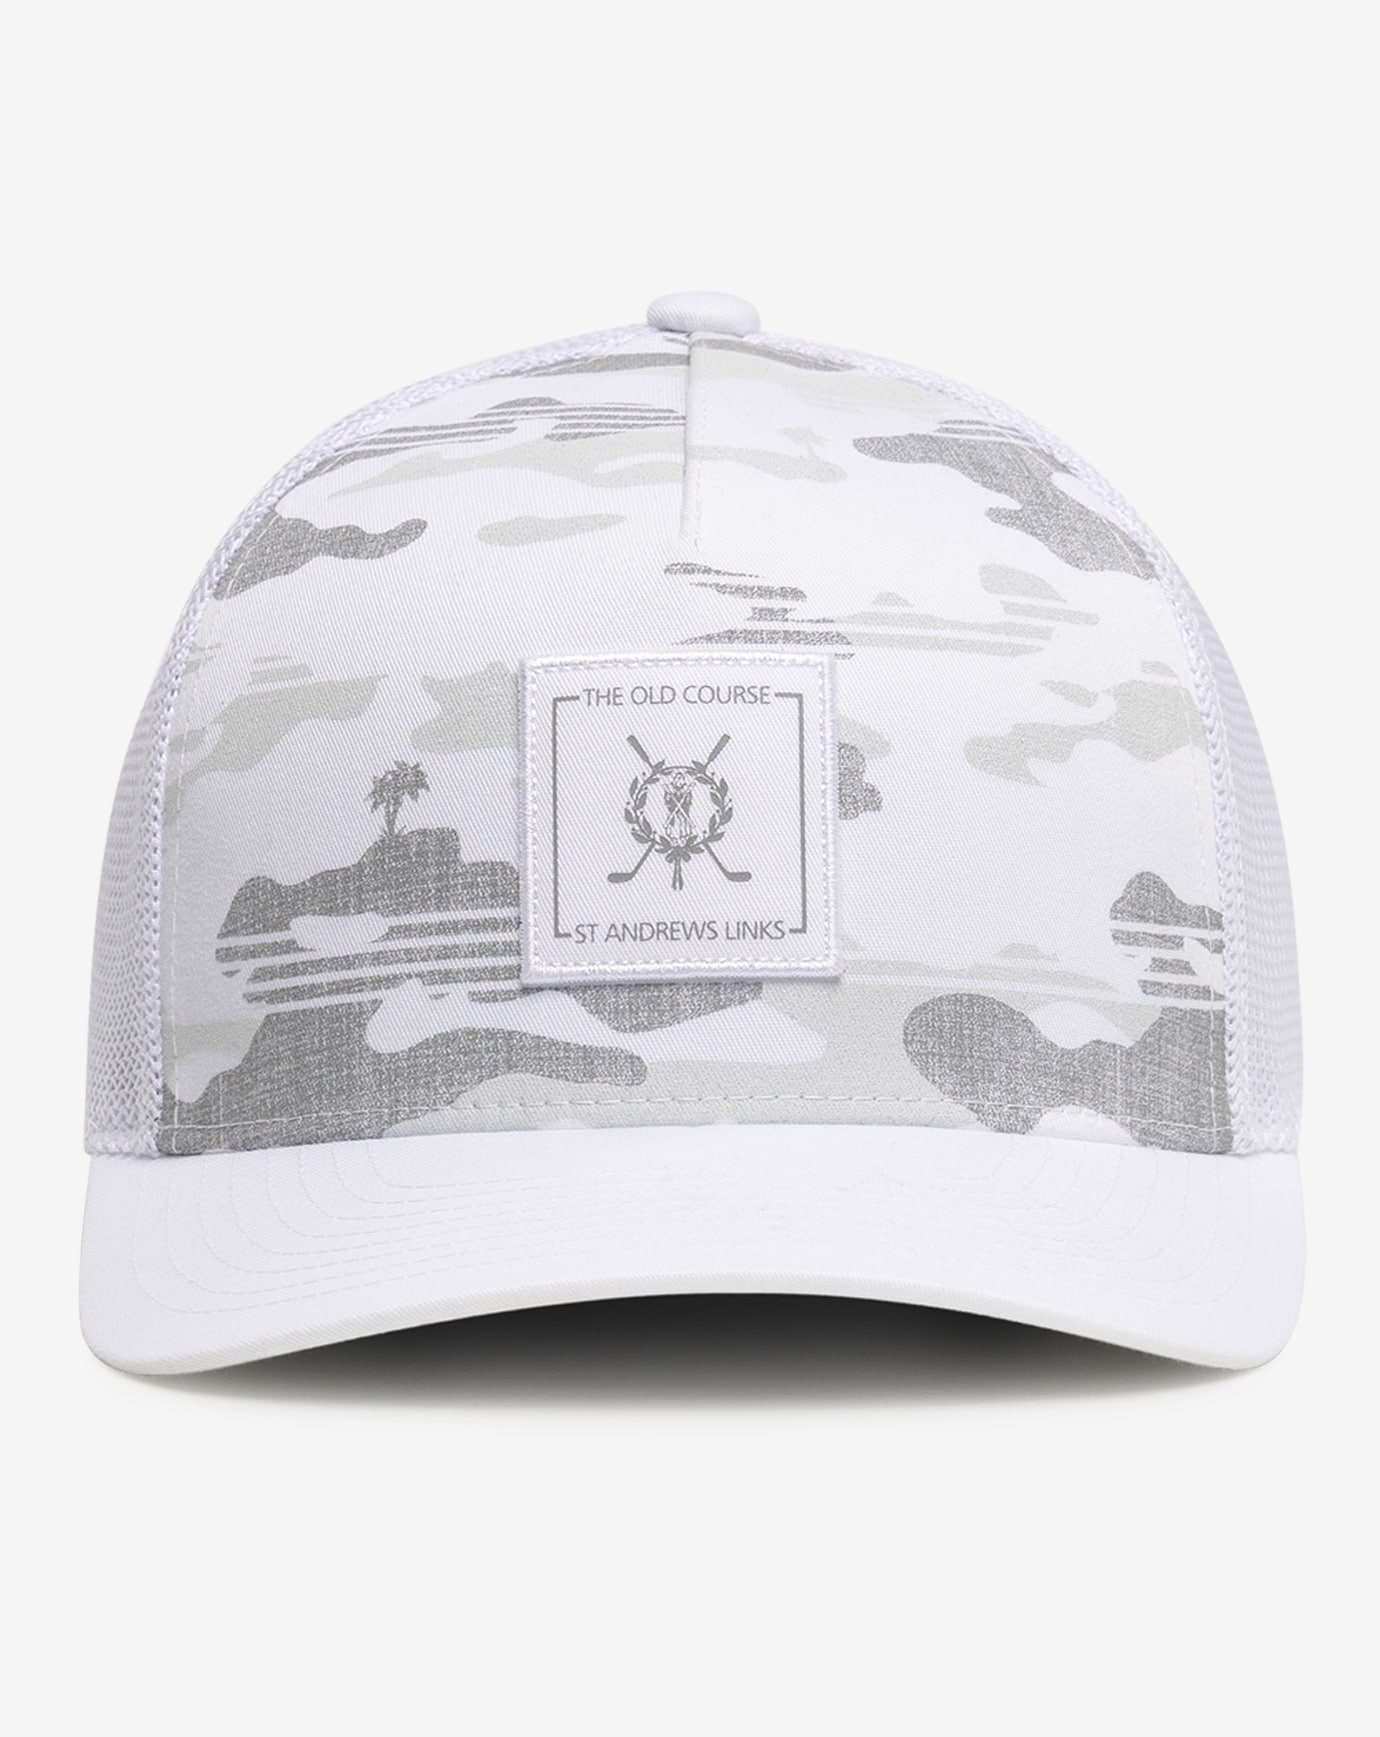 Related Product - ST ANDREWS EXPEDITION SNAPBACK HAT